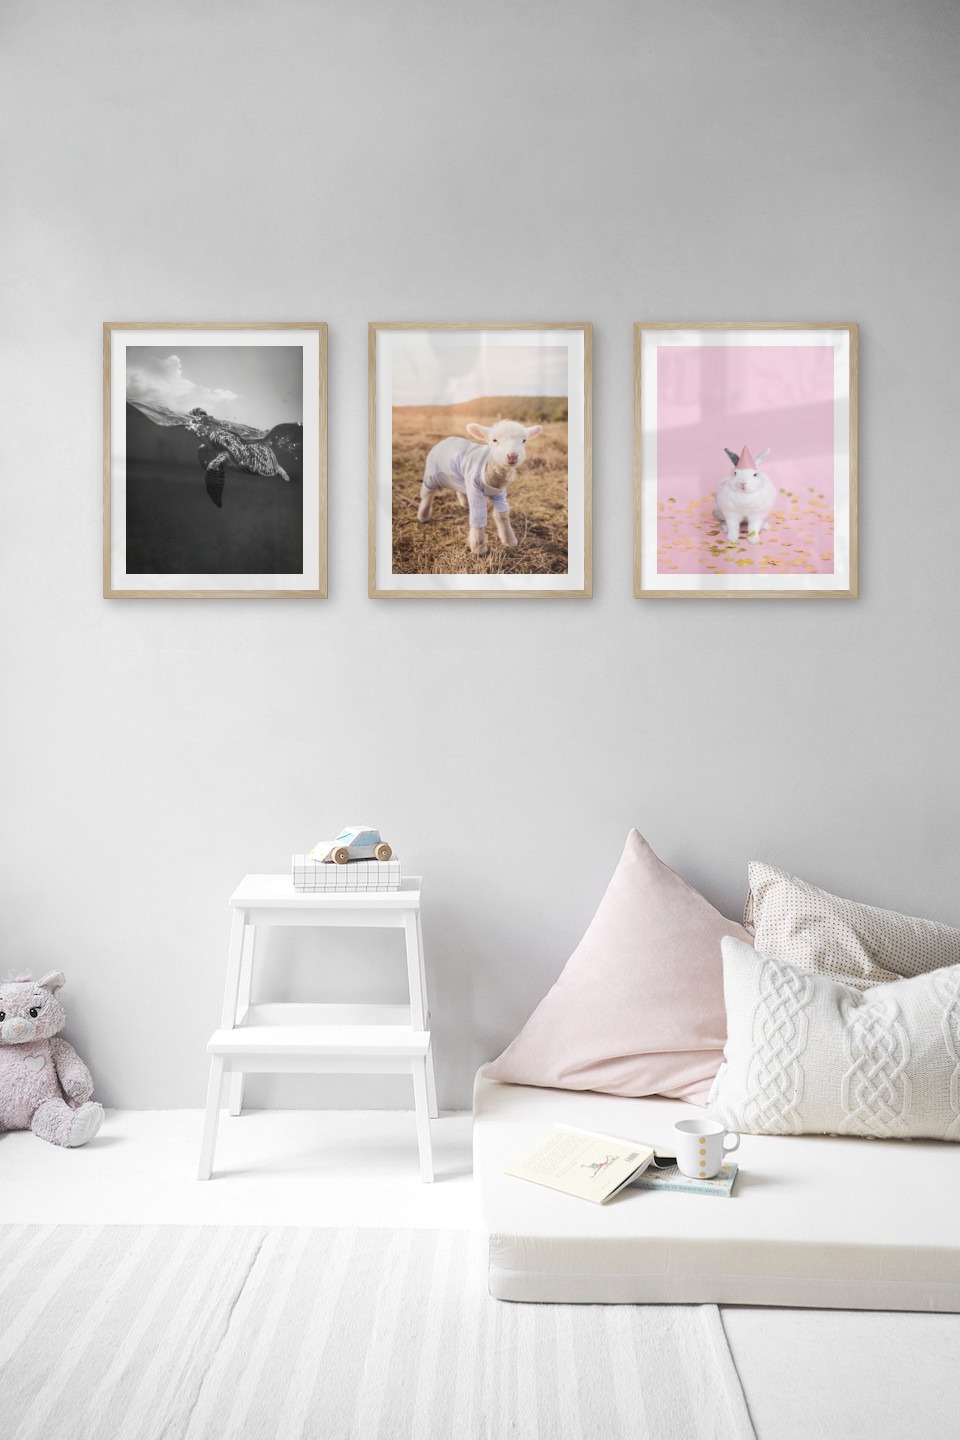 Gallery wall with picture frames in wood in sizes 40x50 with prints "Turtle", "Lamb" and "Rabbit with party hat"